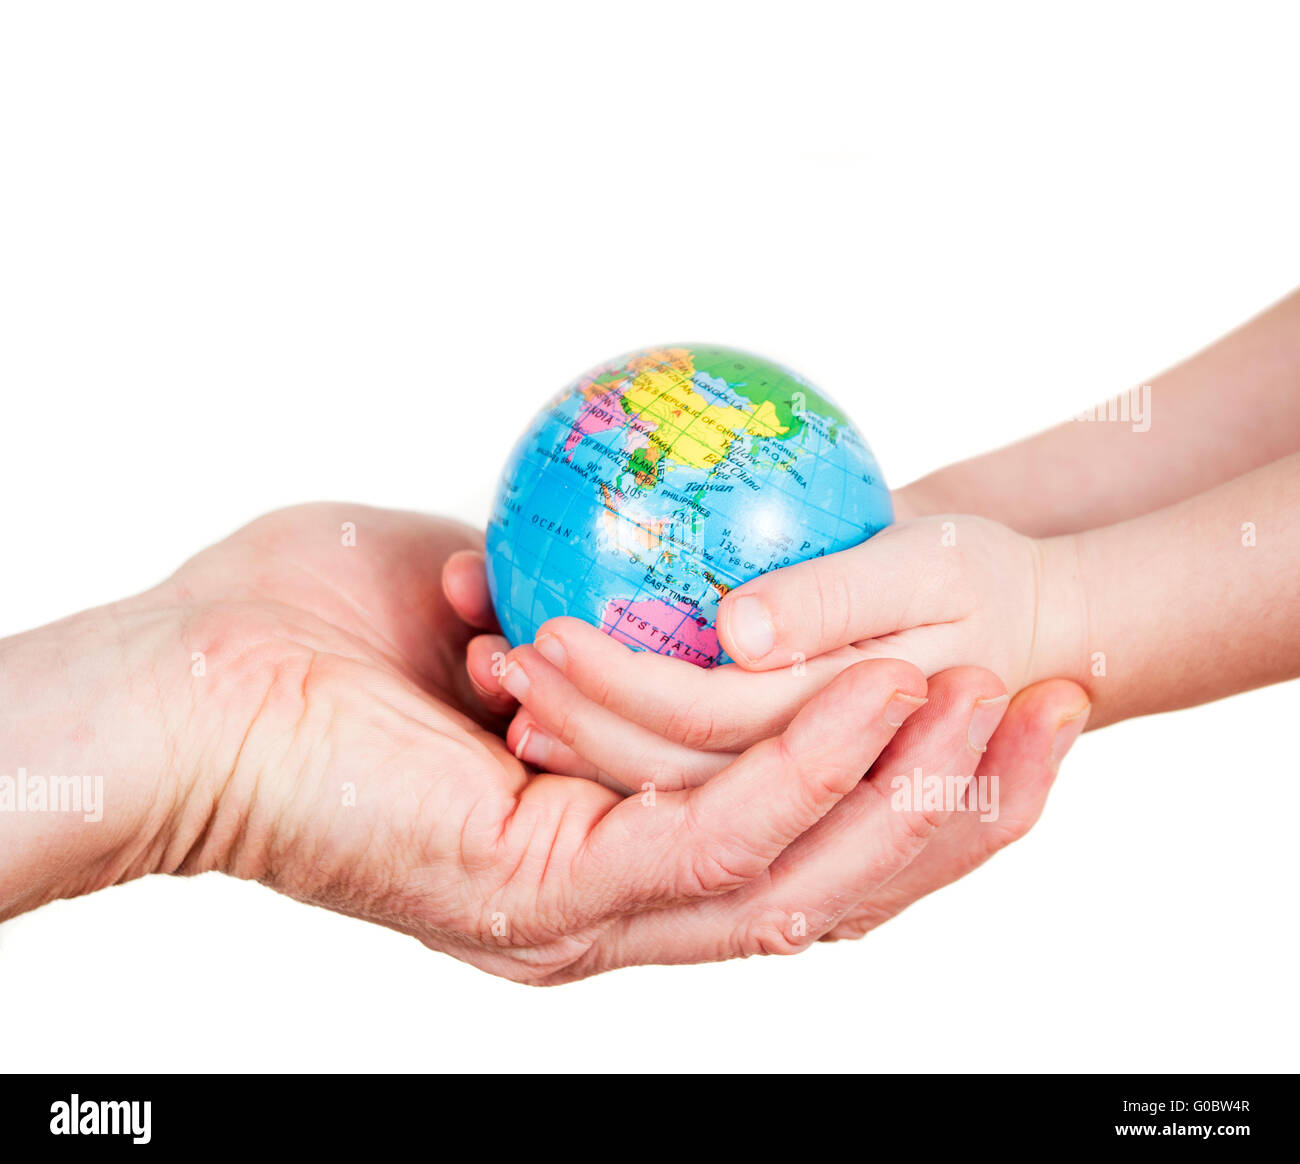 Hands of a child and a man holding a globe Stock Photo